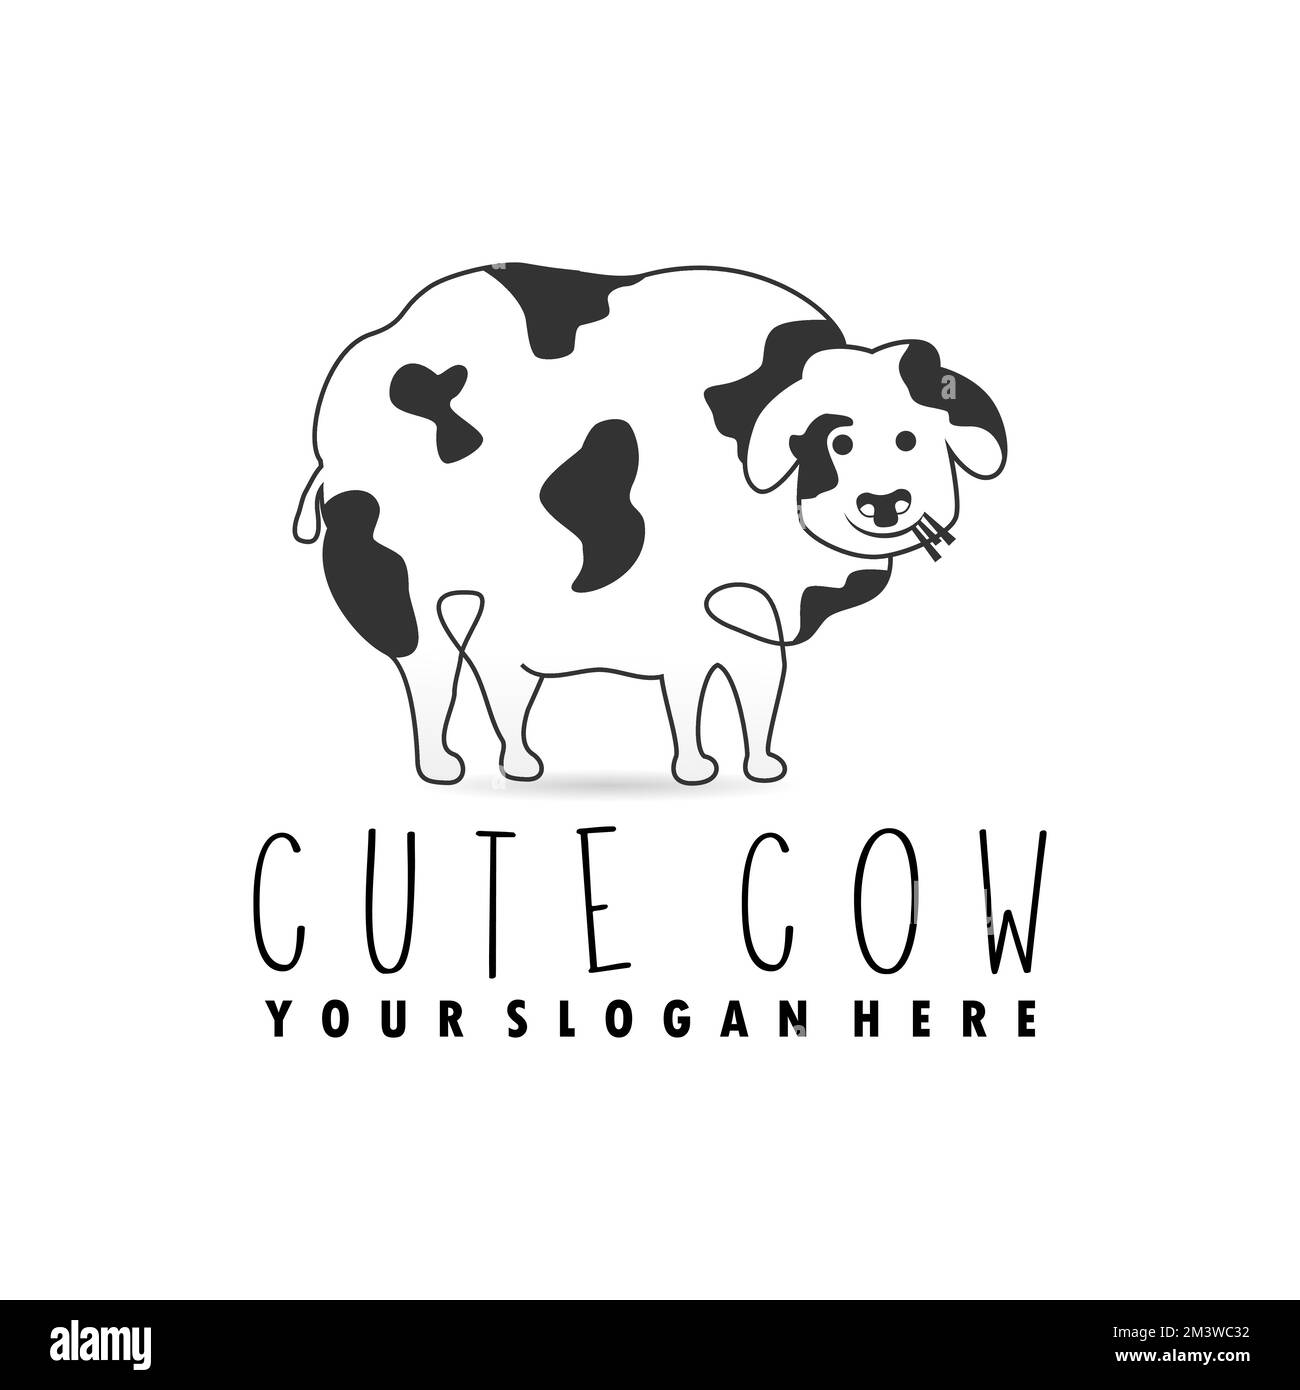 Simple cute cartoon cow image graphic icon logo design abstract concept vector stock. Can be used as a symbol related to animal husbandry or children Stock Vector